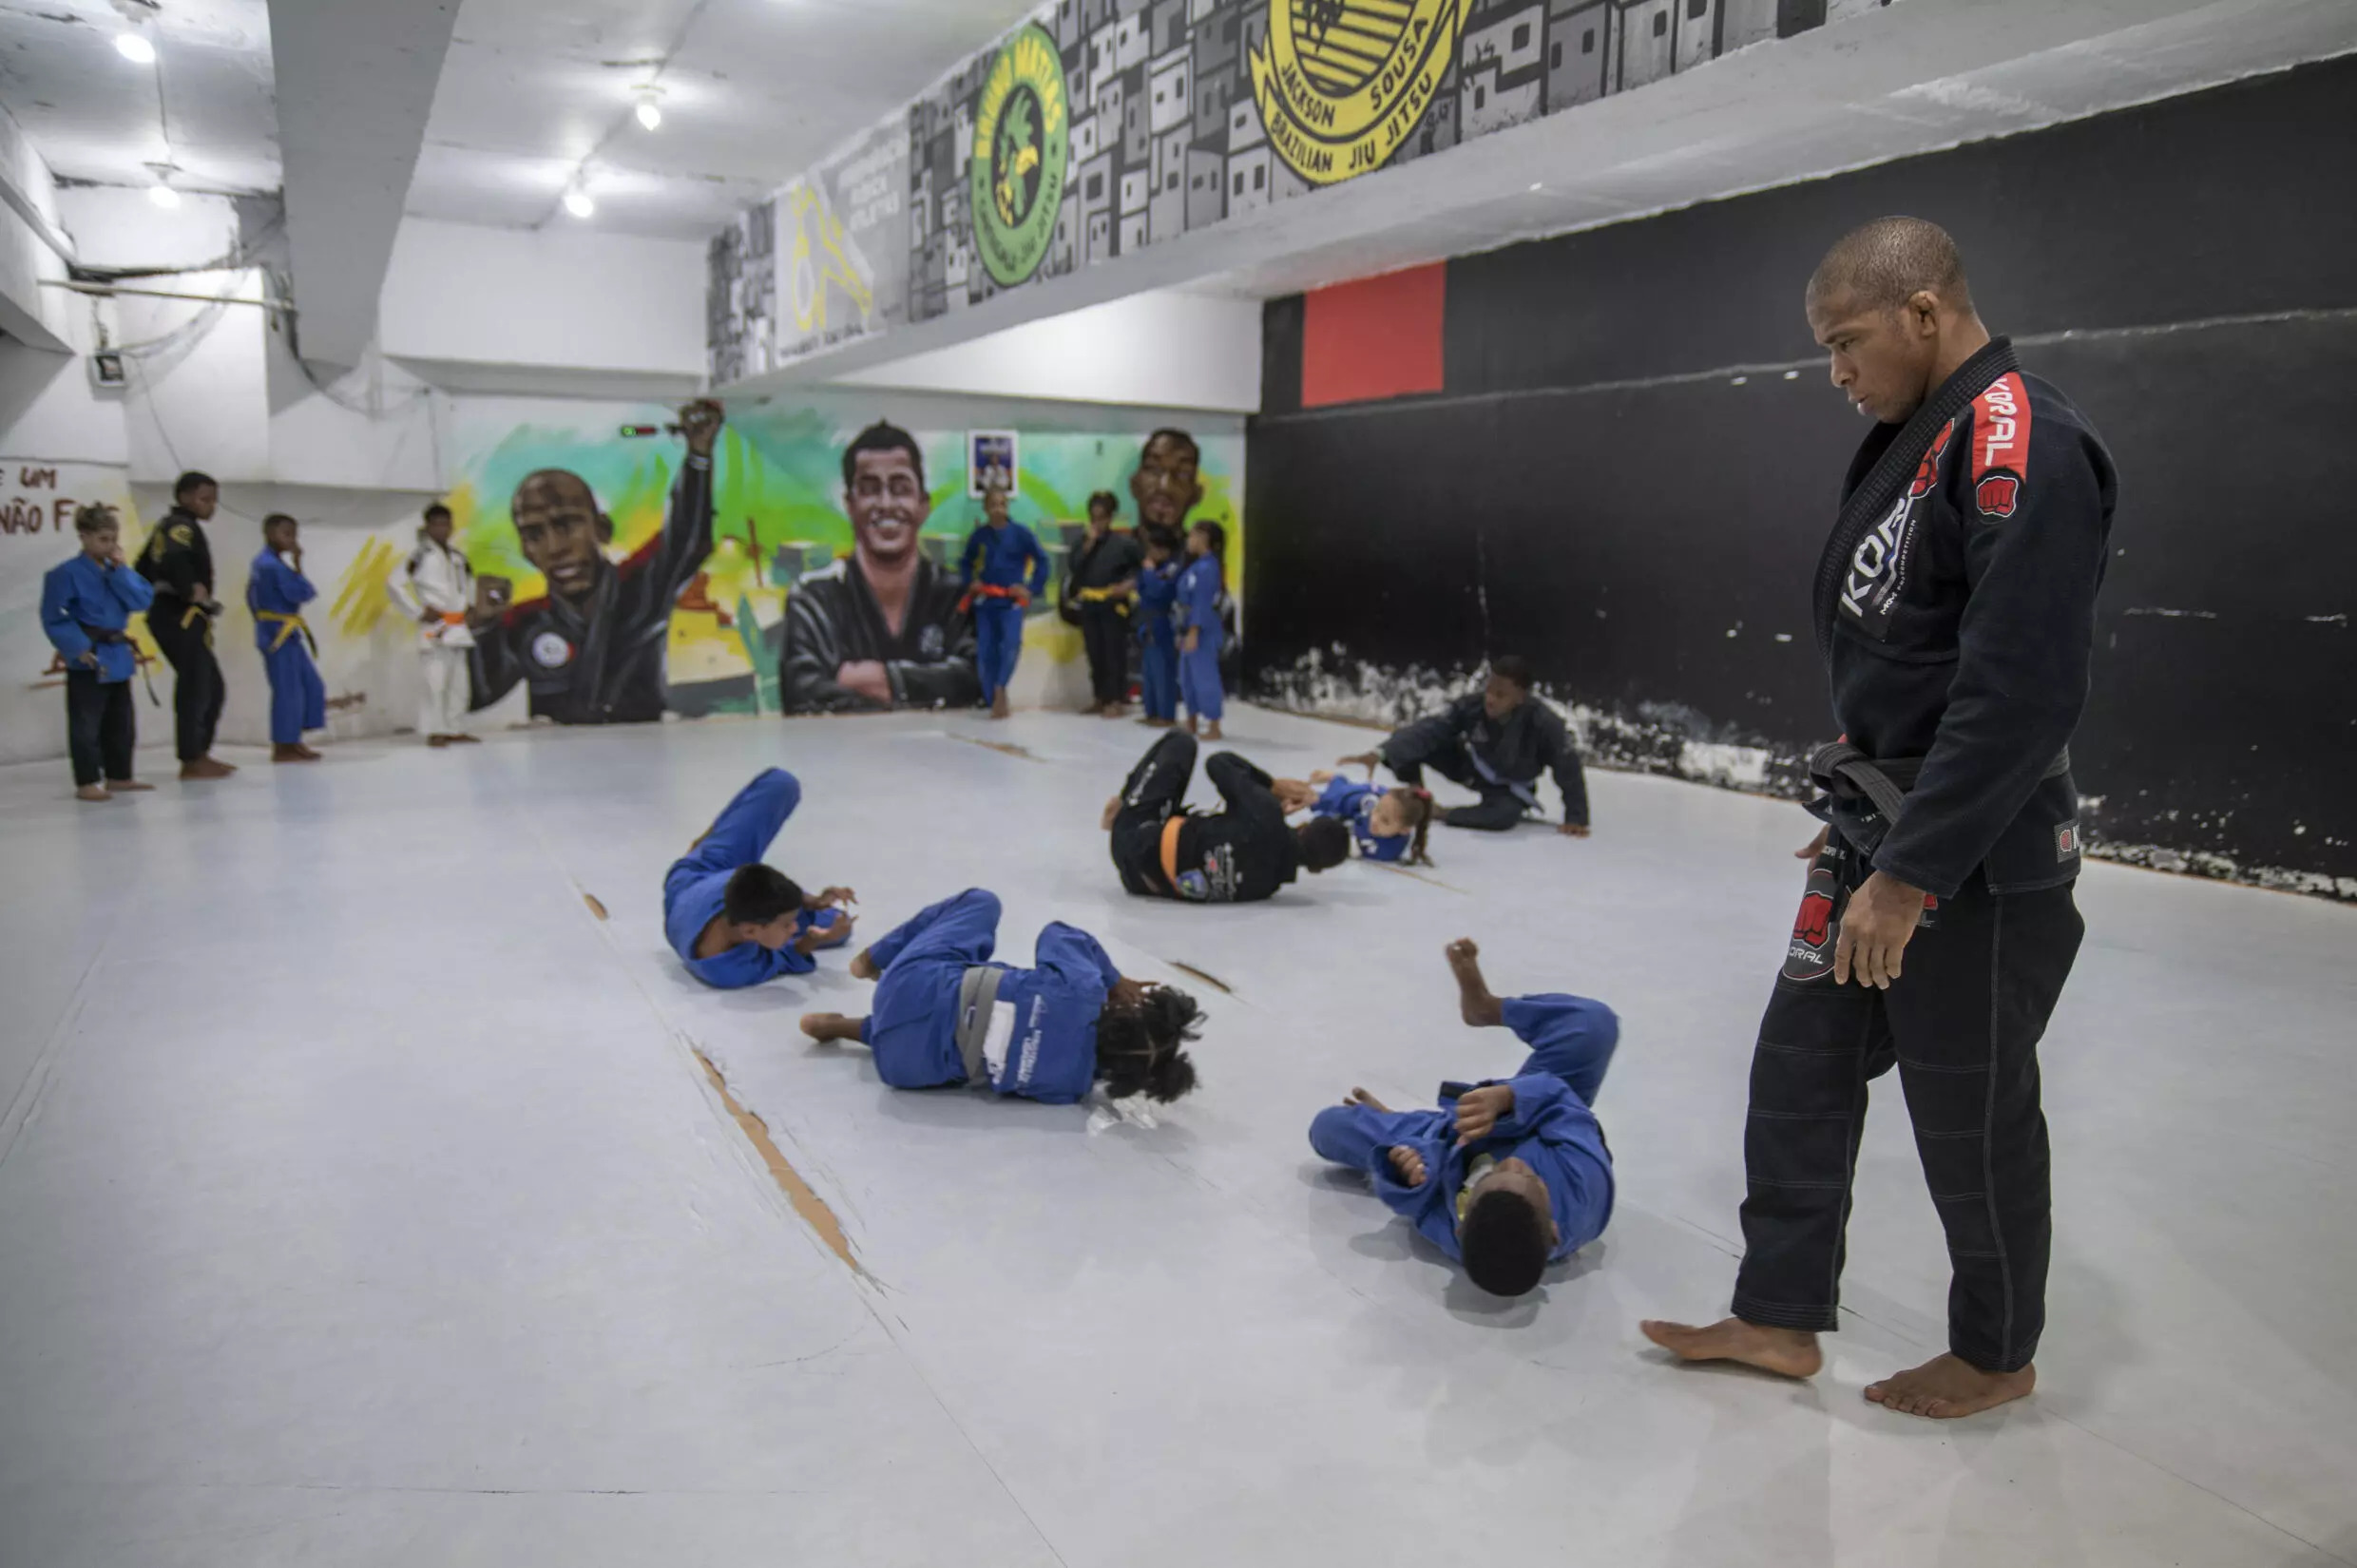 Jiujitsu instructor Douglas Rufino (R) gives instructions to his students at the Cantagalo Jiu-Jitsu gym, located in a Rio favela wedged between two of the city's wealthiest neighborhoods. Photo: AFP